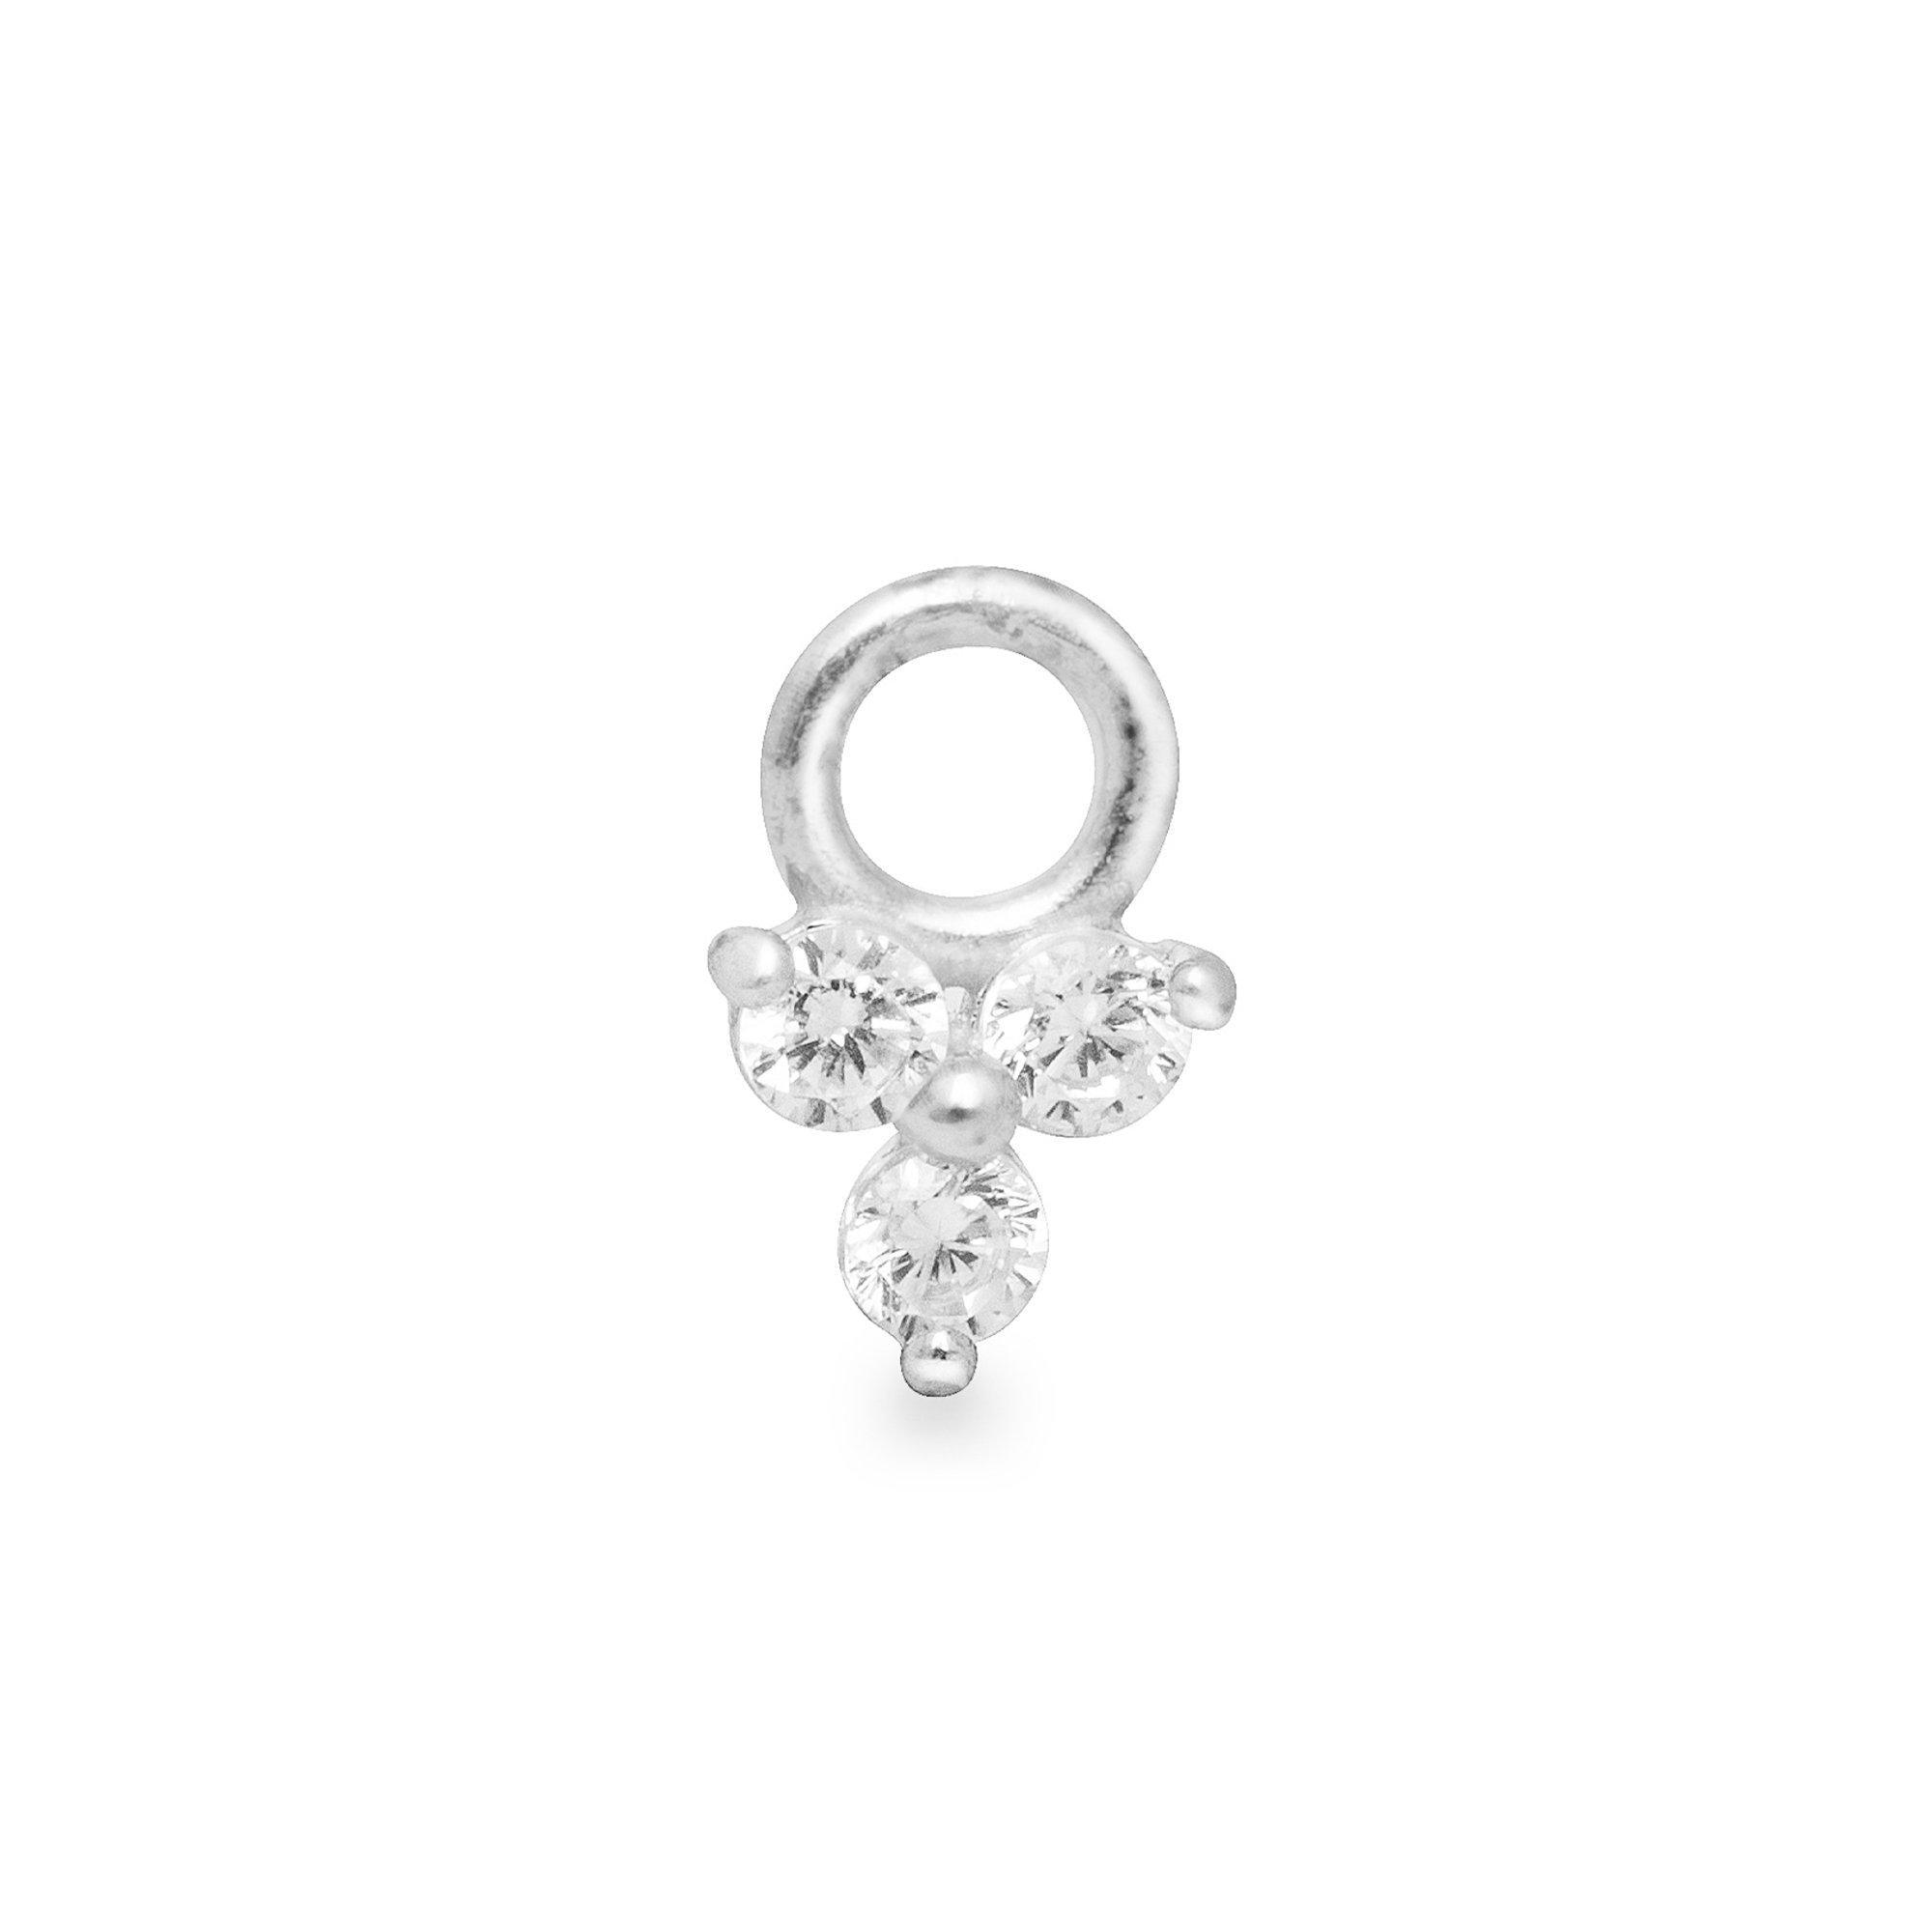 Flor single 9k solid white gold tiny 3 crystal charm for hinged segment earring - Helix & Conch